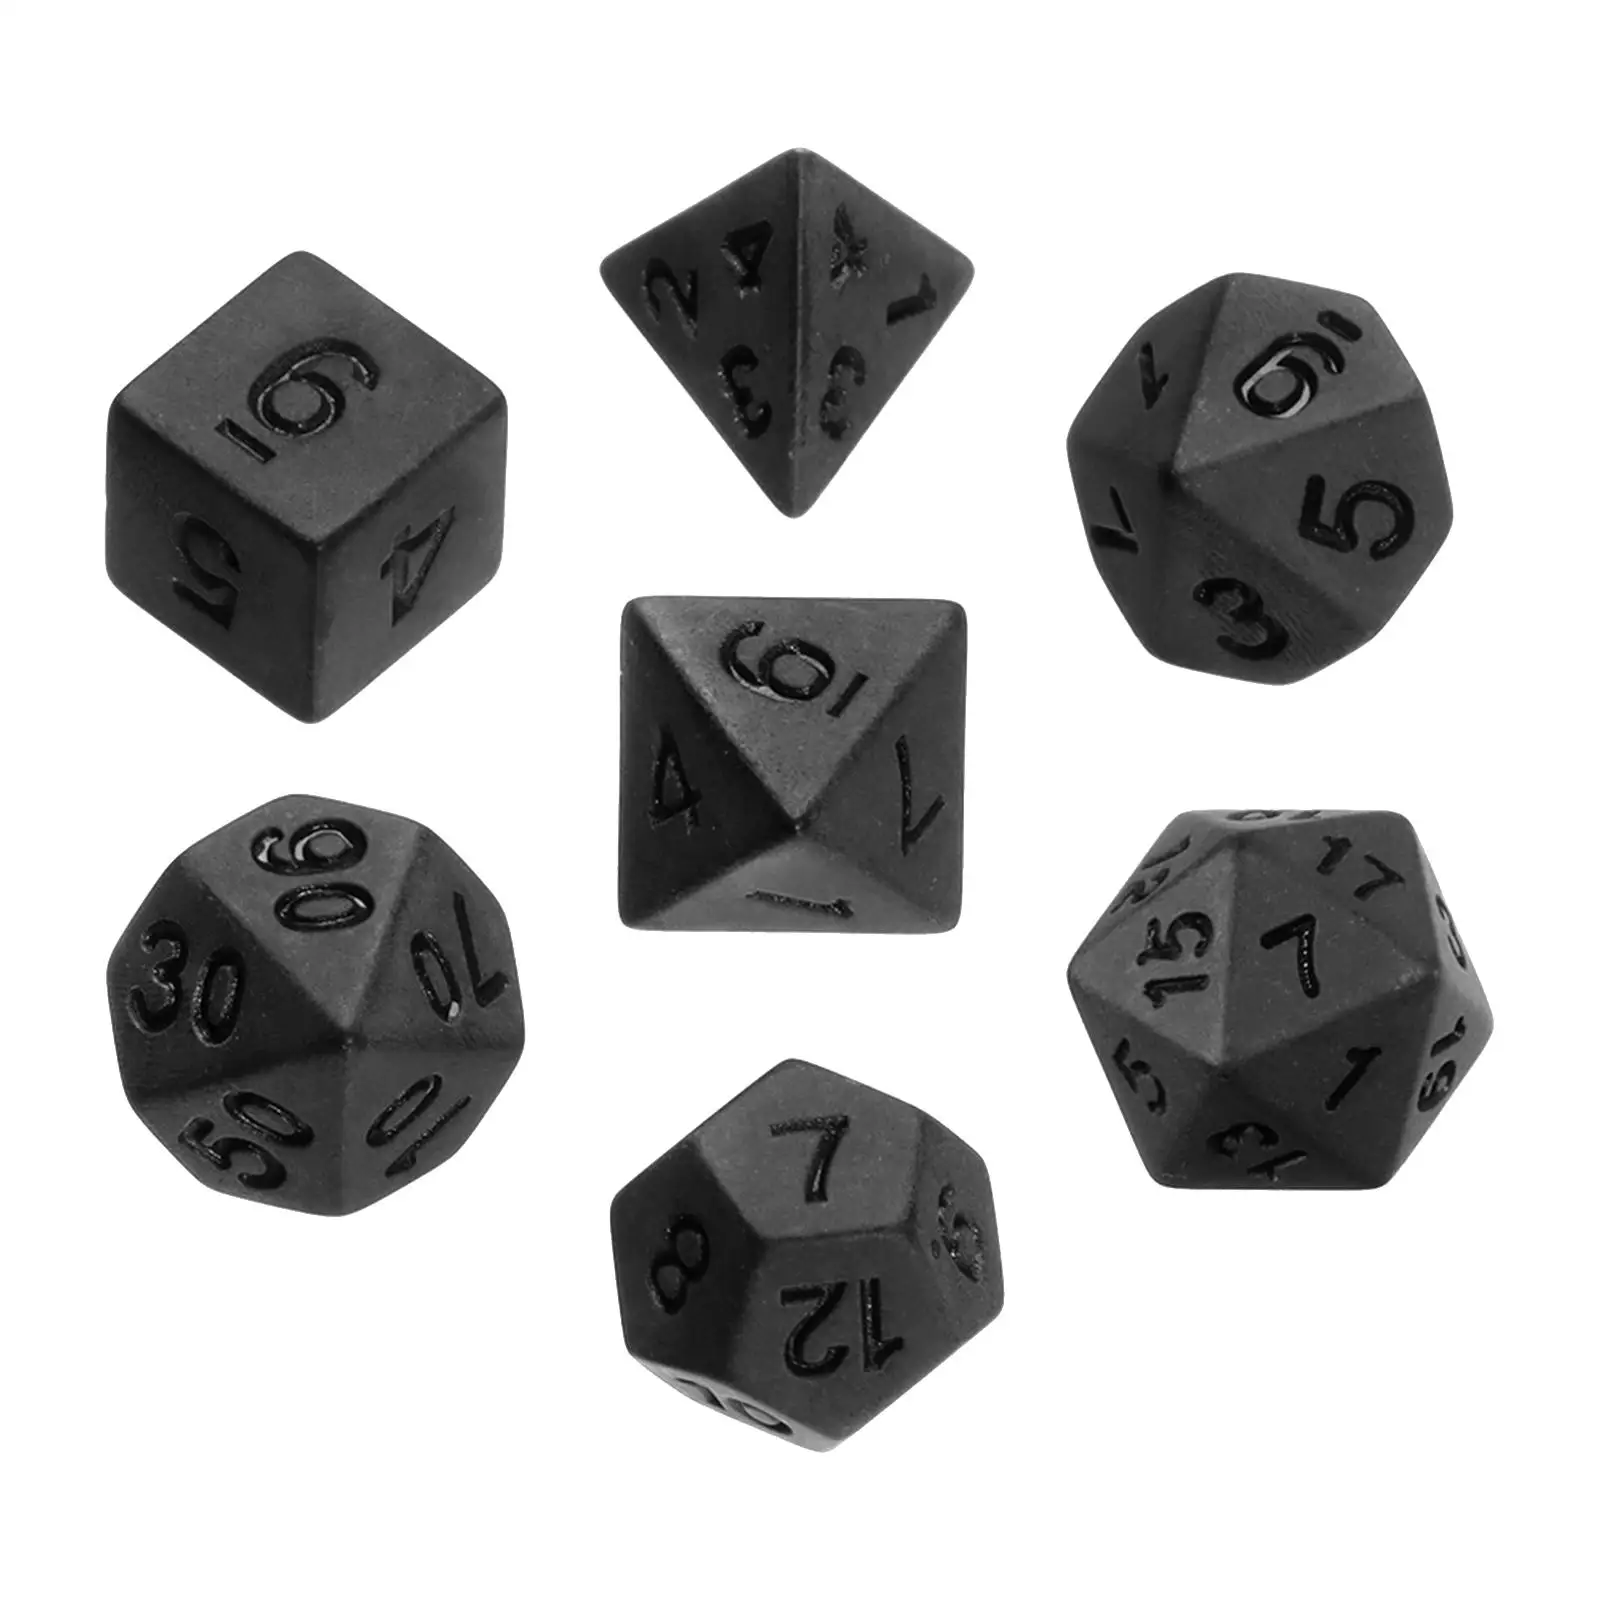 Polyhedral Dice black, 7 Pieces Game Dices D6 D4 D8 D10 D12 D20 for Role Playing Board Game Drinking Entertainment